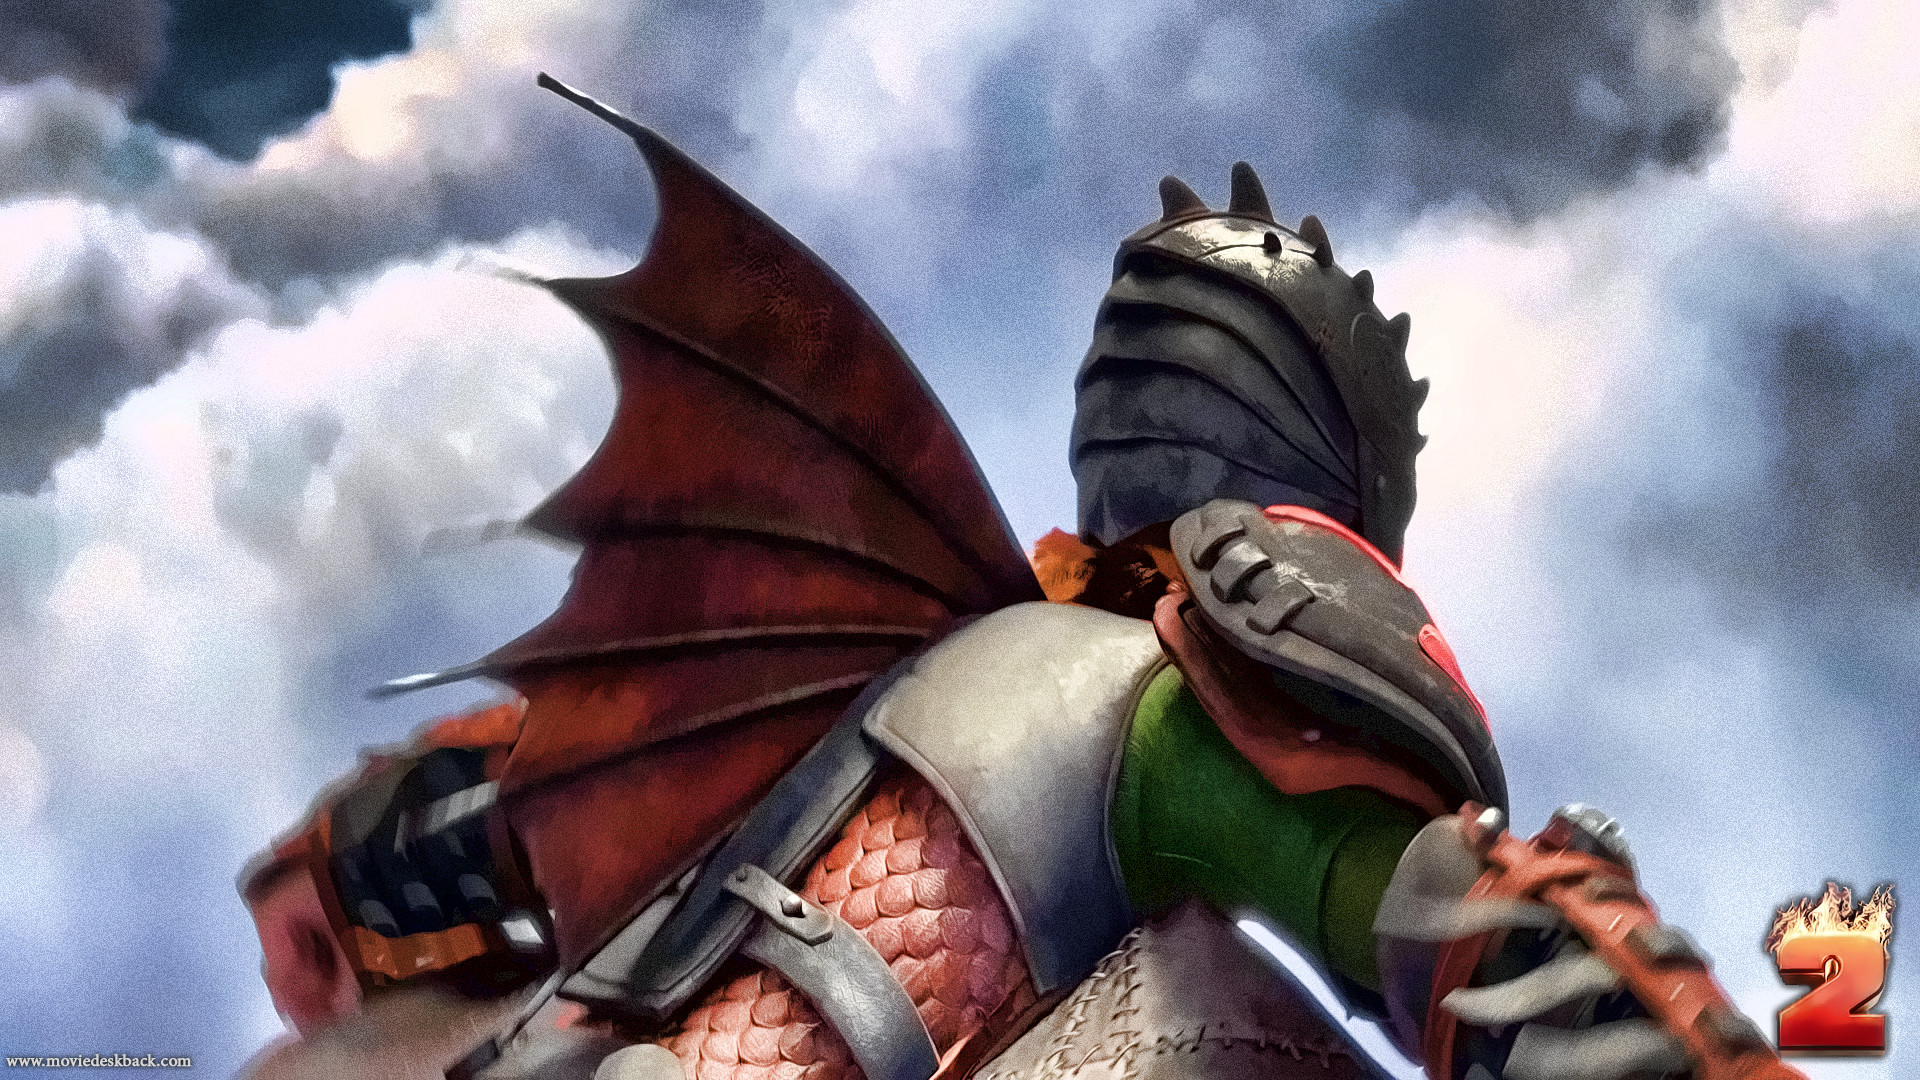 1920x1080 How To Train Your Dragon Wallpaper Computer Desktop Background 74899